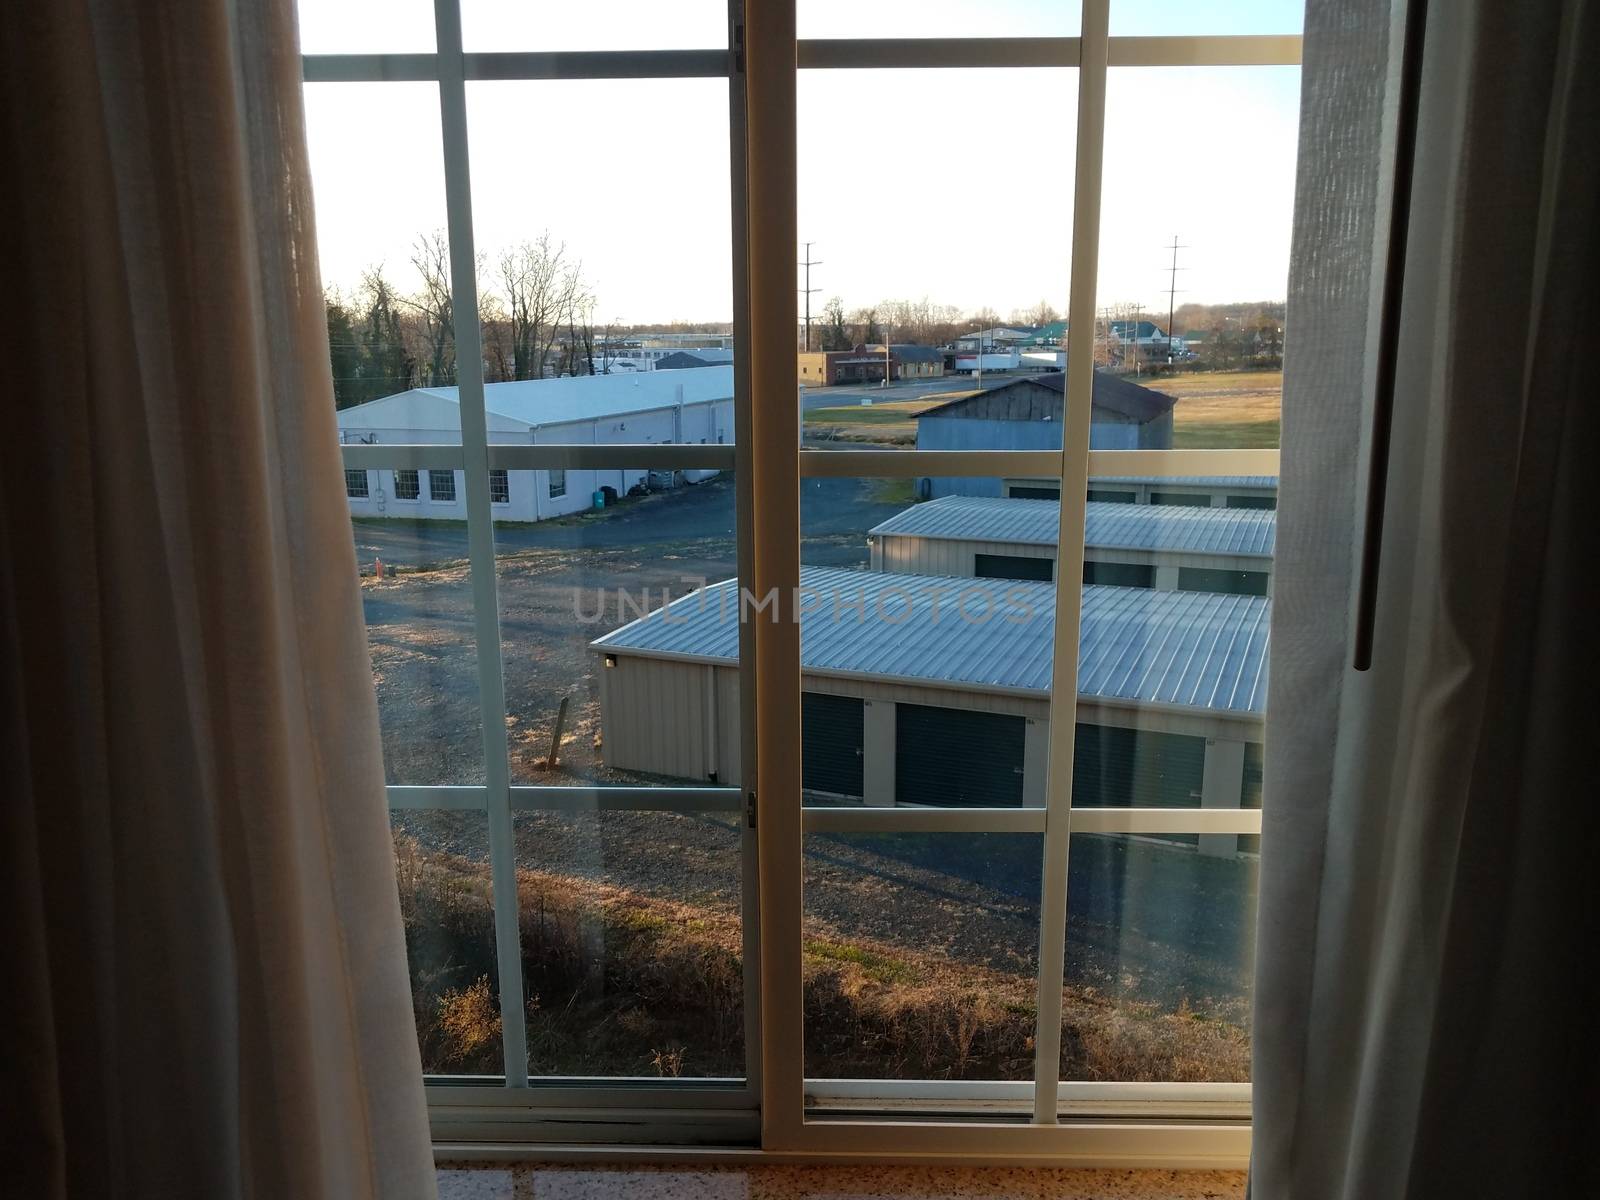 view of structures or buildings from window with curtains